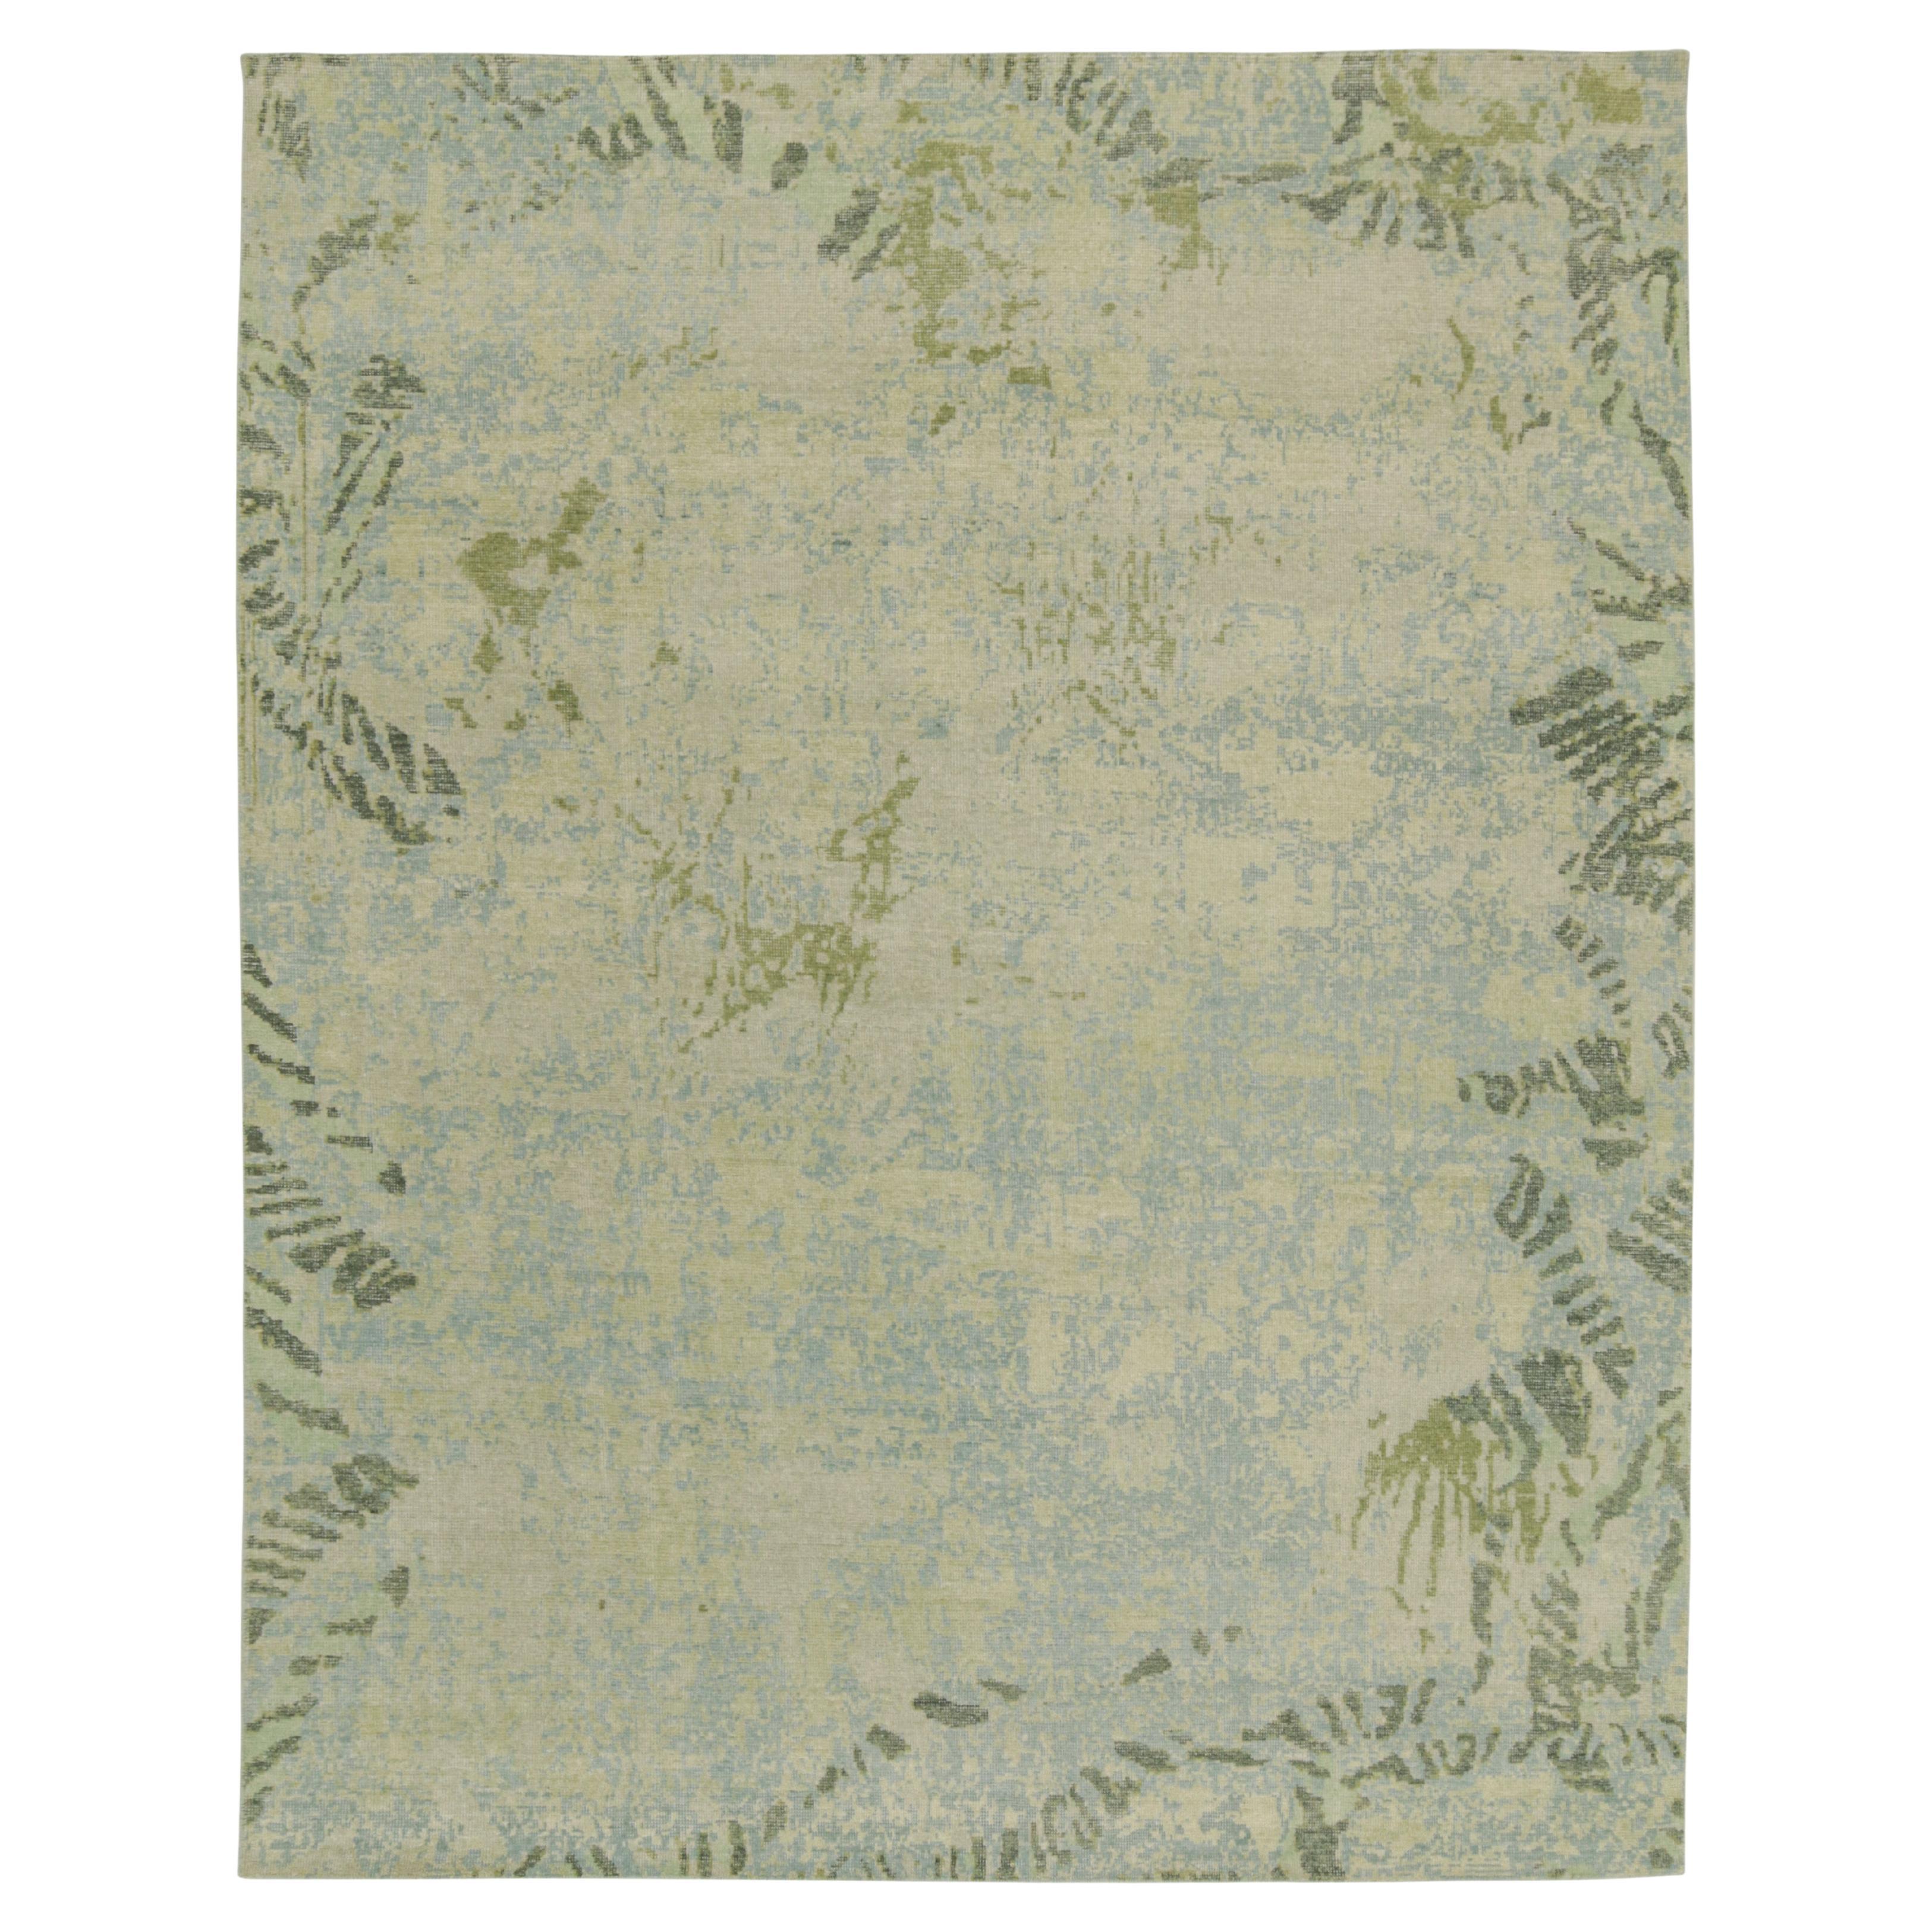 Rug & Kilim’s Distressed Style Abstract Rug in Blue, Gray and Green Pattern